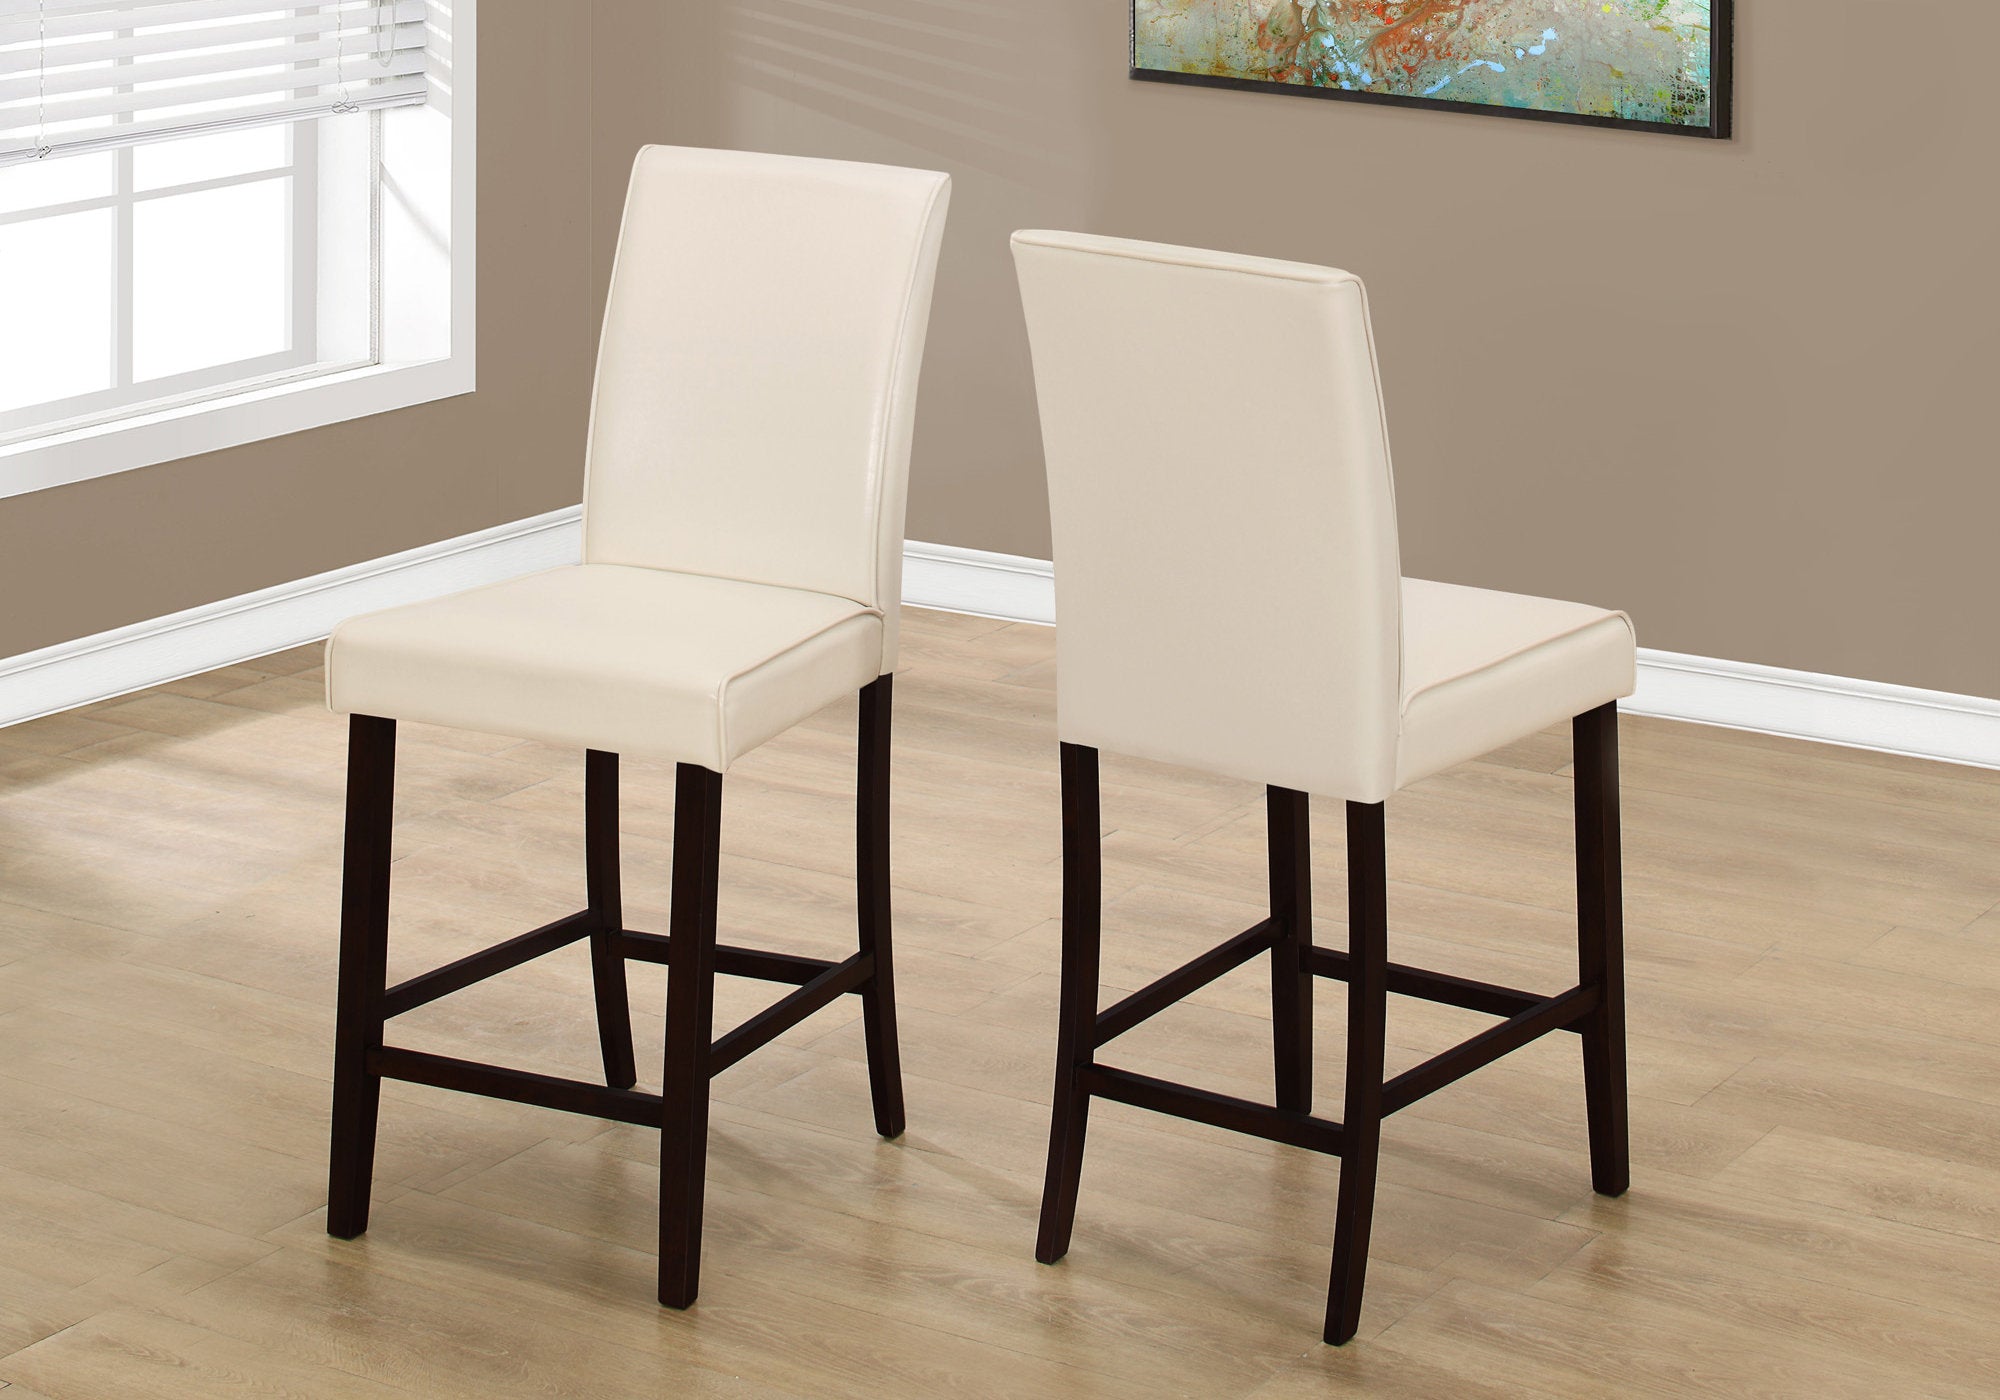 MN-431903    Dining Chair, Set Of 2, Counter Height, Pu Leather-Look, Upholstered, Wood Legs, Kitchen, Leather Look, Wooden Legs, Beige, Dark Brown, Contemporary, Modern